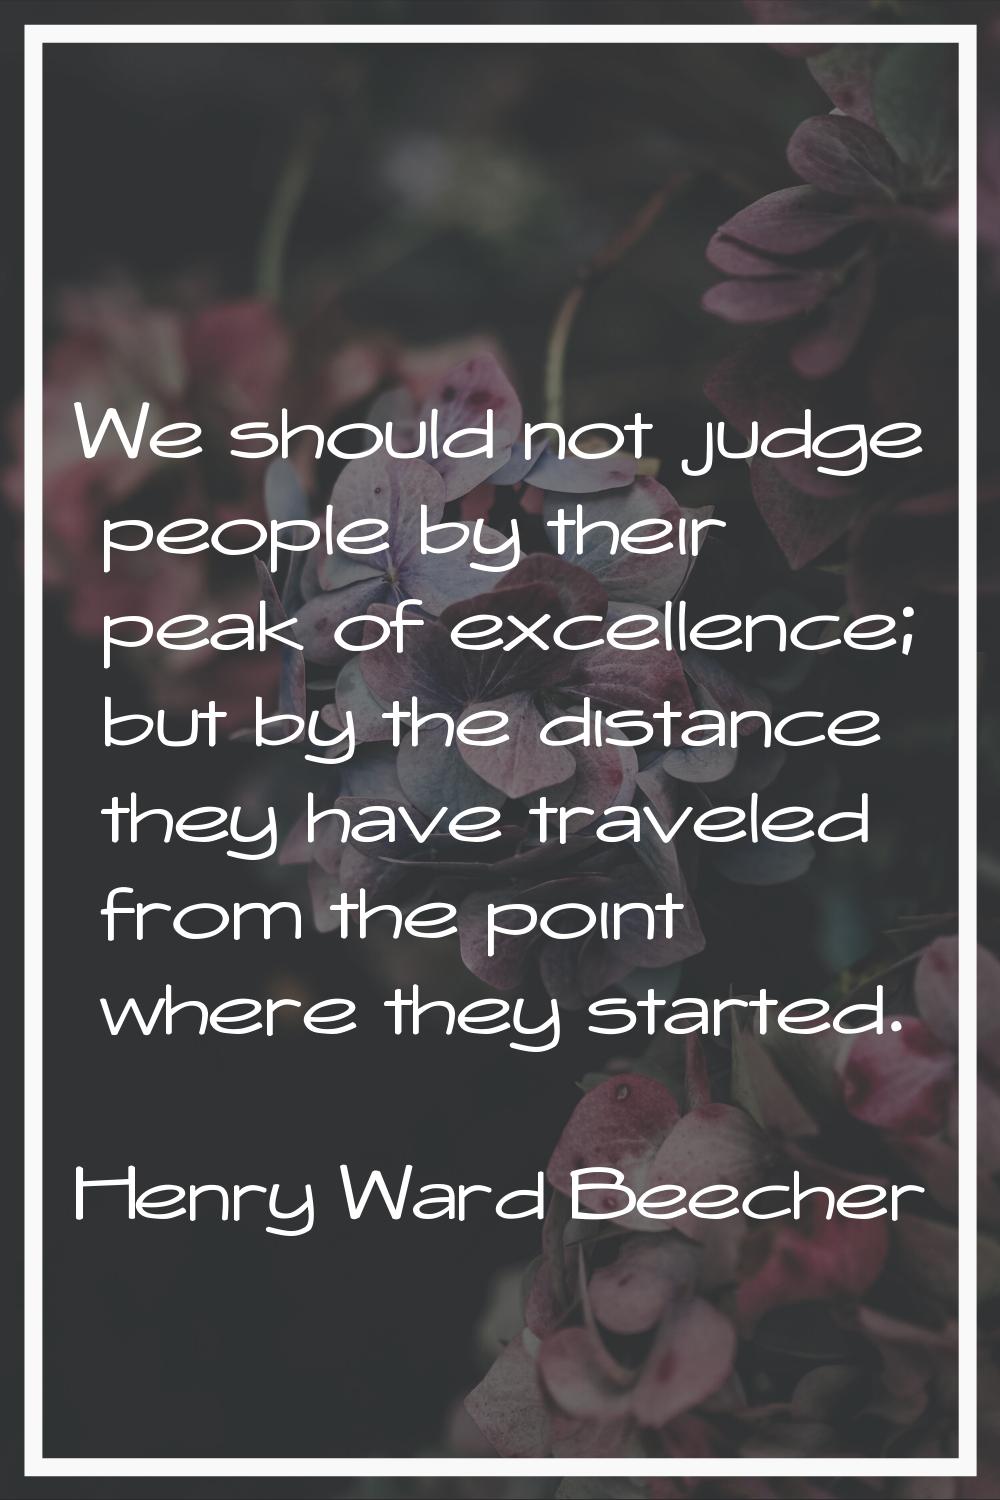 We should not judge people by their peak of excellence; but by the distance they have traveled from